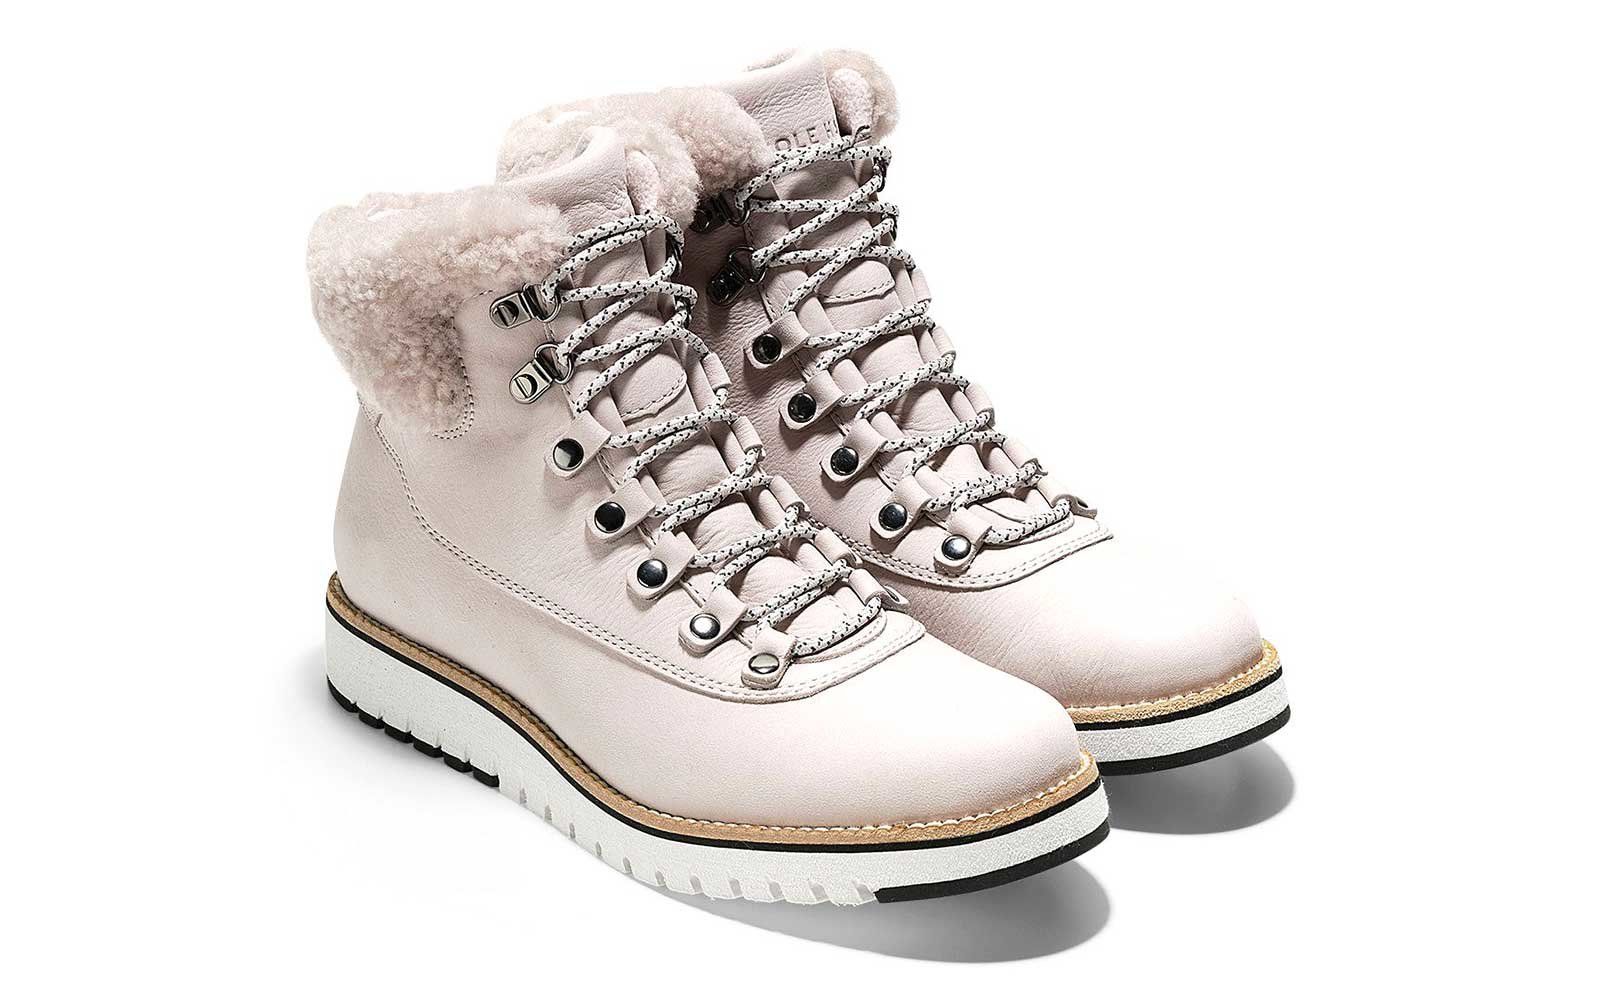 20+ Most Stylish and Trendy Women's Hiking Boots